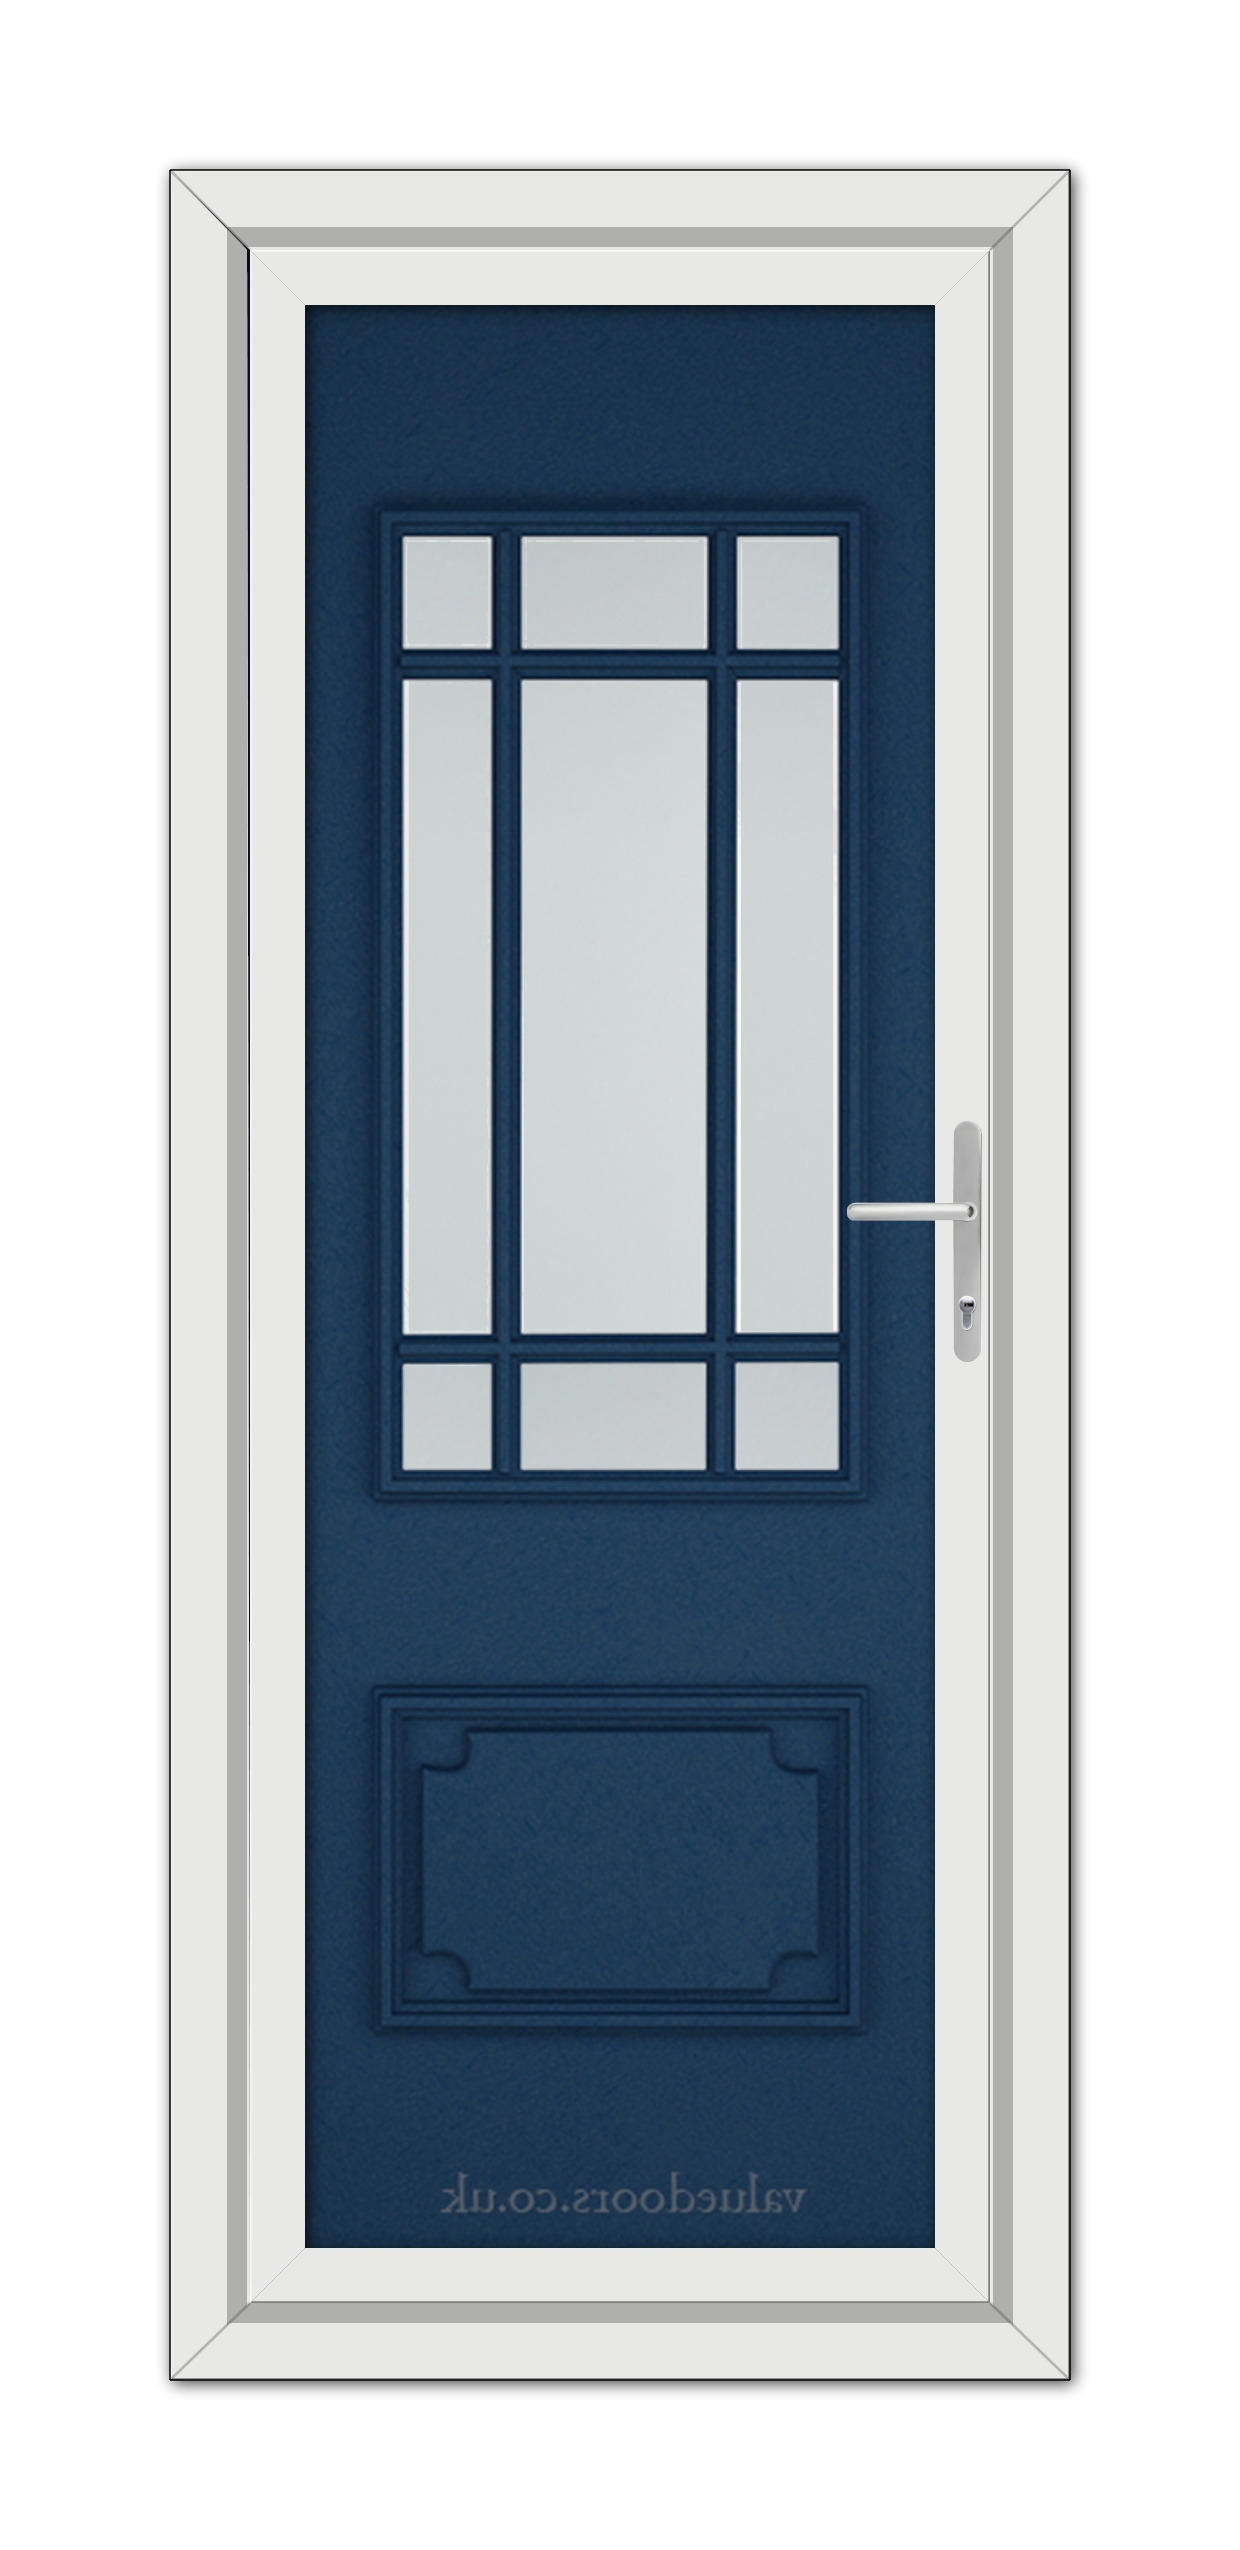 A vertical image of a modern Blue Seville uPVC Door with a vertical glass window at the top, surrounded by a white frame.